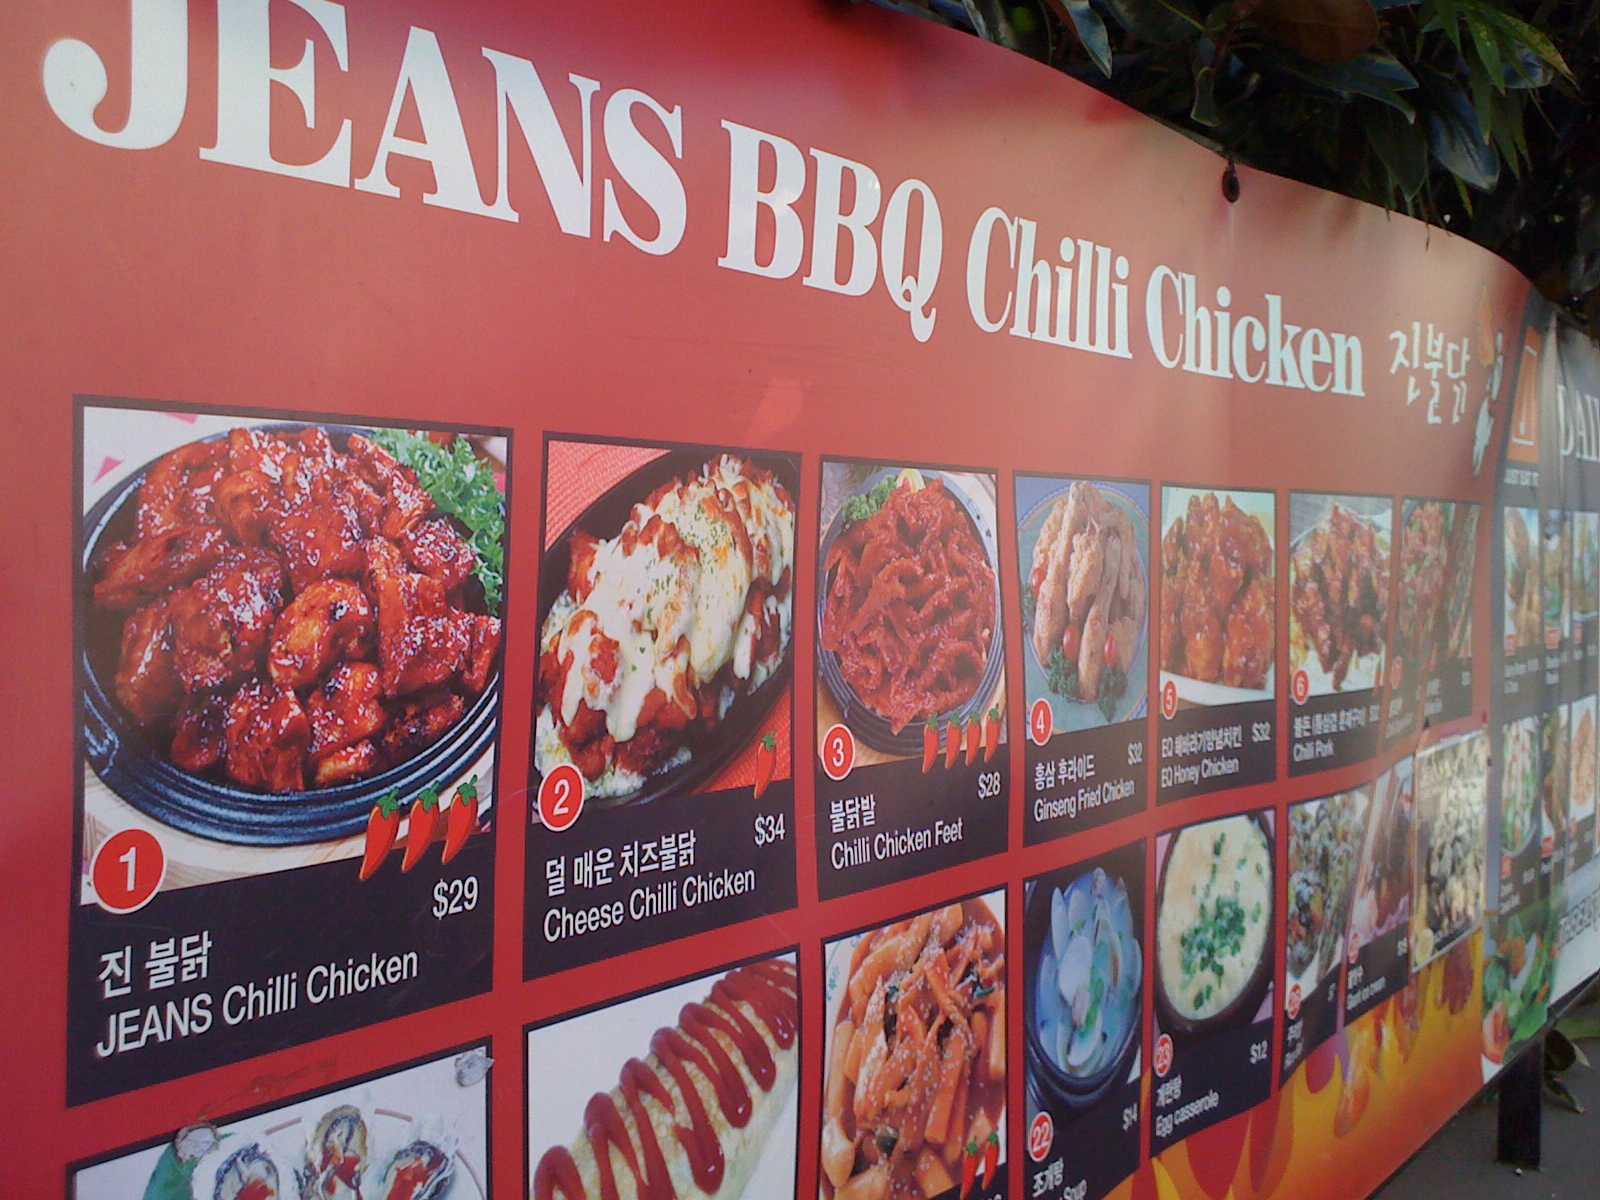 Sign for Jeans Korean BBQ restaurant, on the east side of the station.